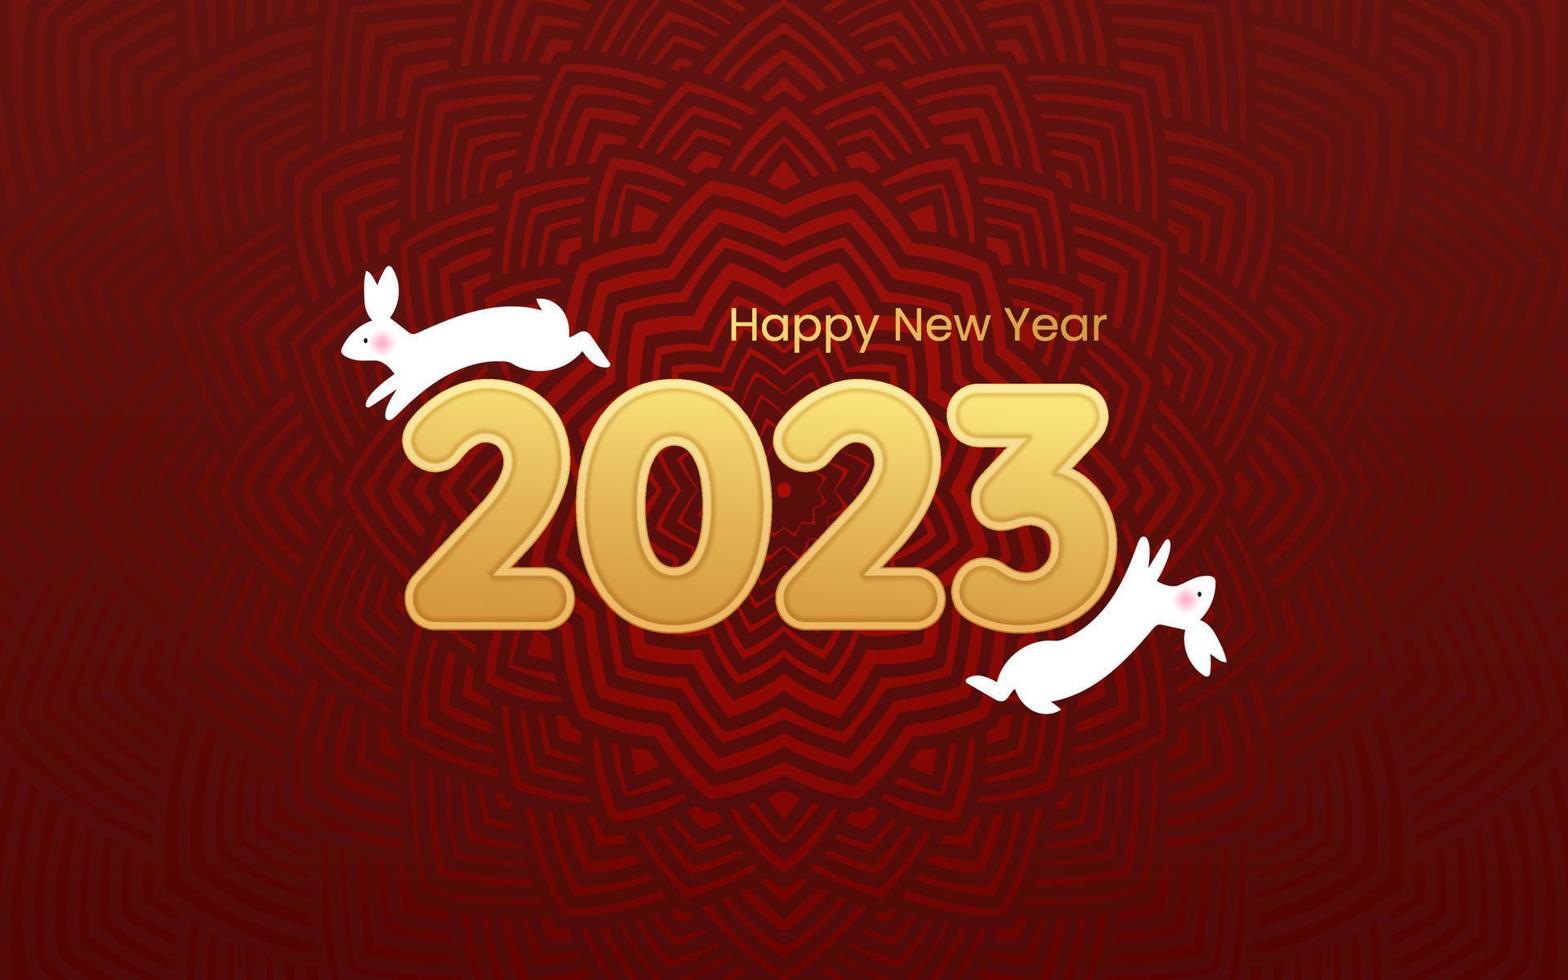 Calendar 2023 template vector, running cute rabbit with ears. Planner 2023 year, Paper cut wall calendar cover. Zodiac Chinese hare luxury design. Happy new year. Red, white and gold colors pattern. vector